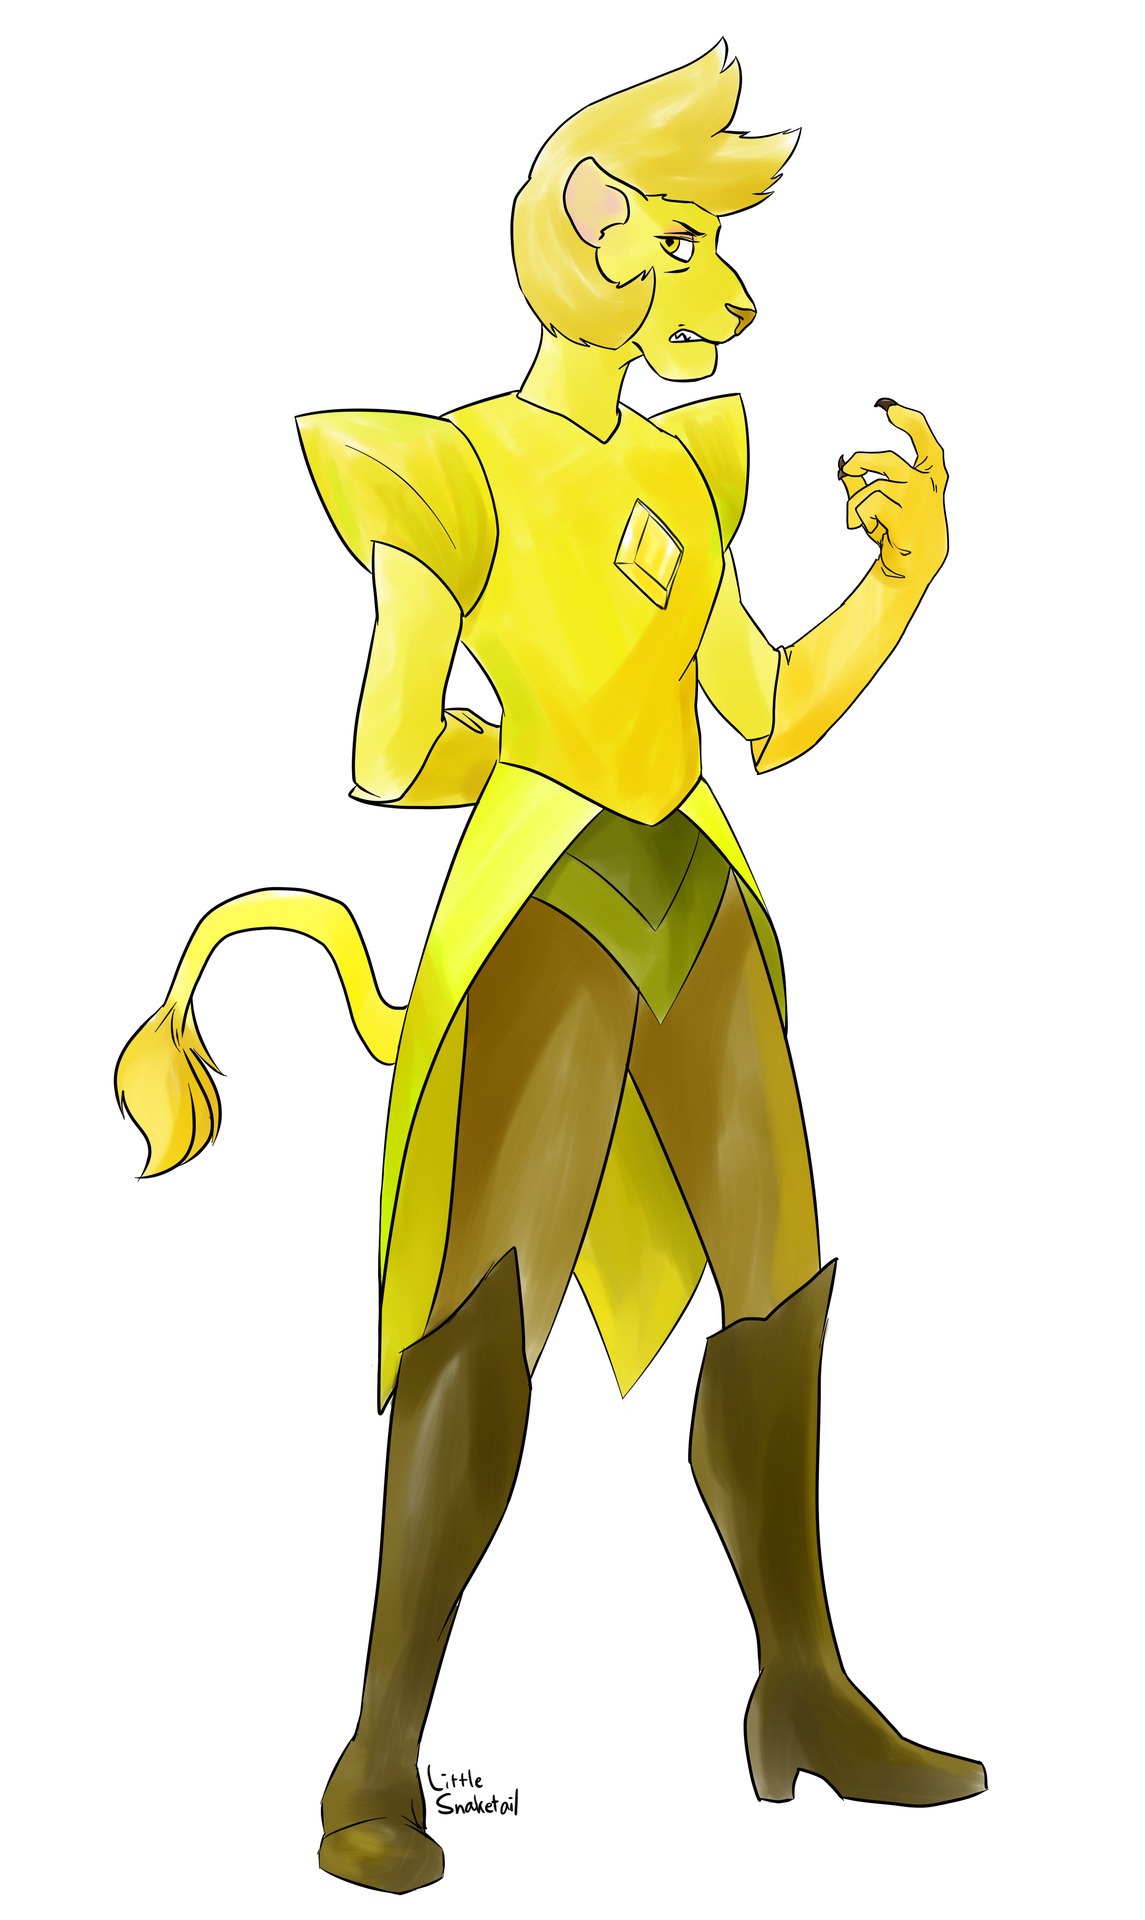 Yellow Diamond anthro (lioness) Lines and coloring done in Paint Tool SAI Steven Universe © Rebecca Sugar/CN